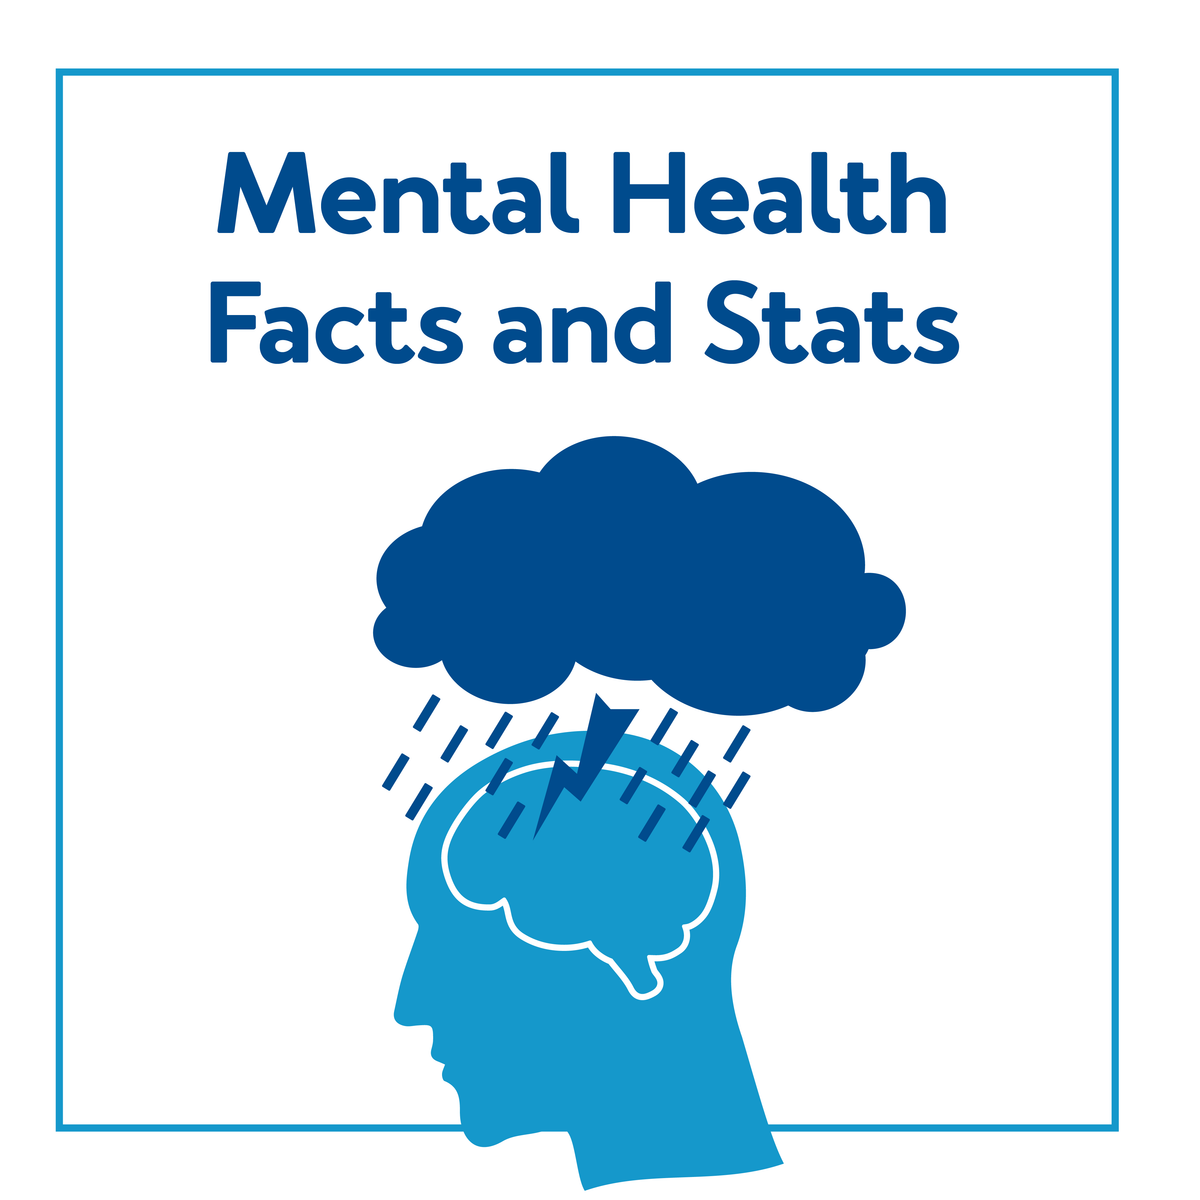 A graphic of a head with clouds over it raining. Text, mental health facts and stats